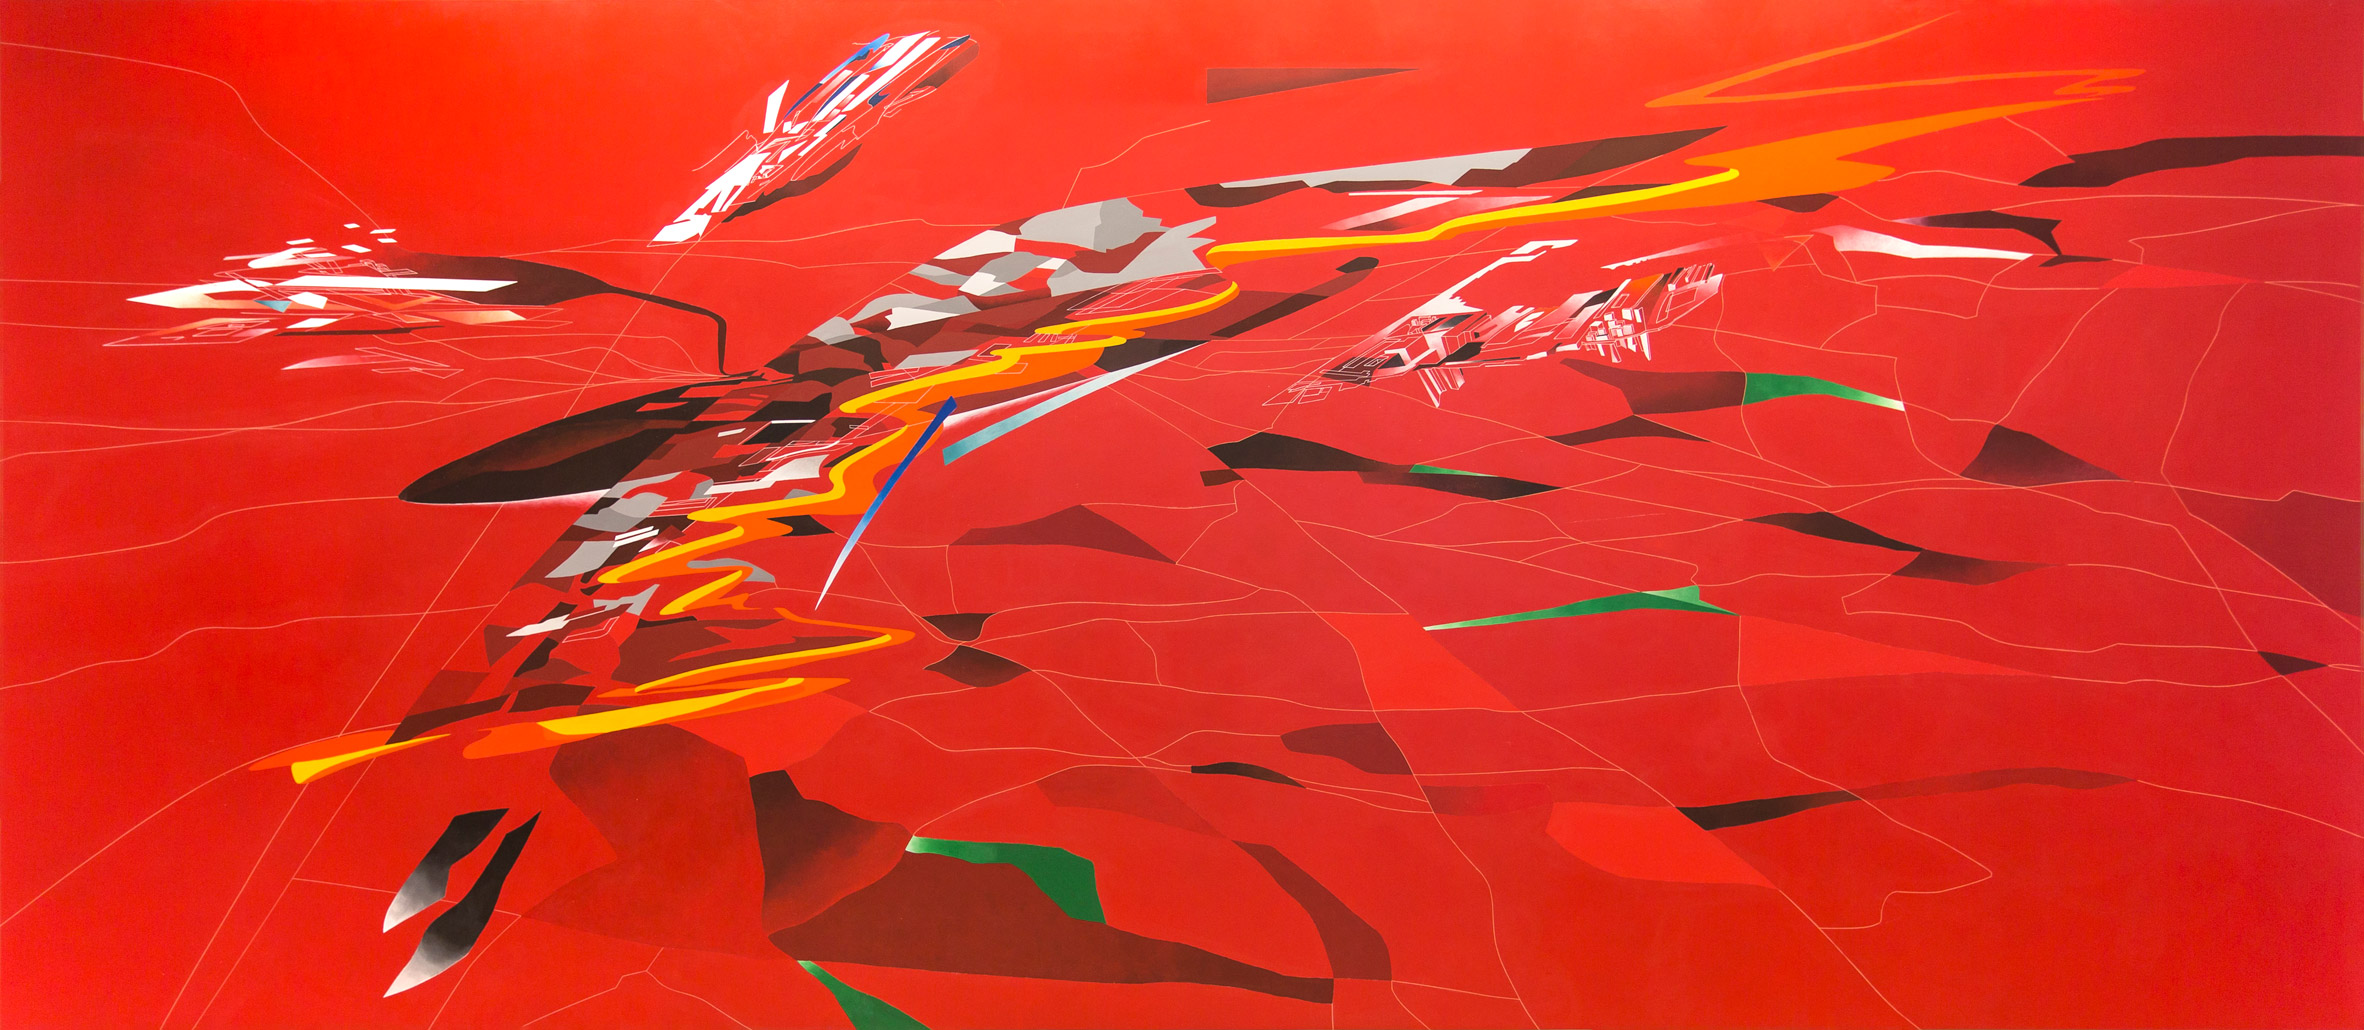 3 Zaha Hadid's early paintings to go on show at Serpentine Sackler Gallery Serpentine Sackler Gallery Zaha Hadid&#8217;s early paintings at Serpentine Sackler Gallery 3